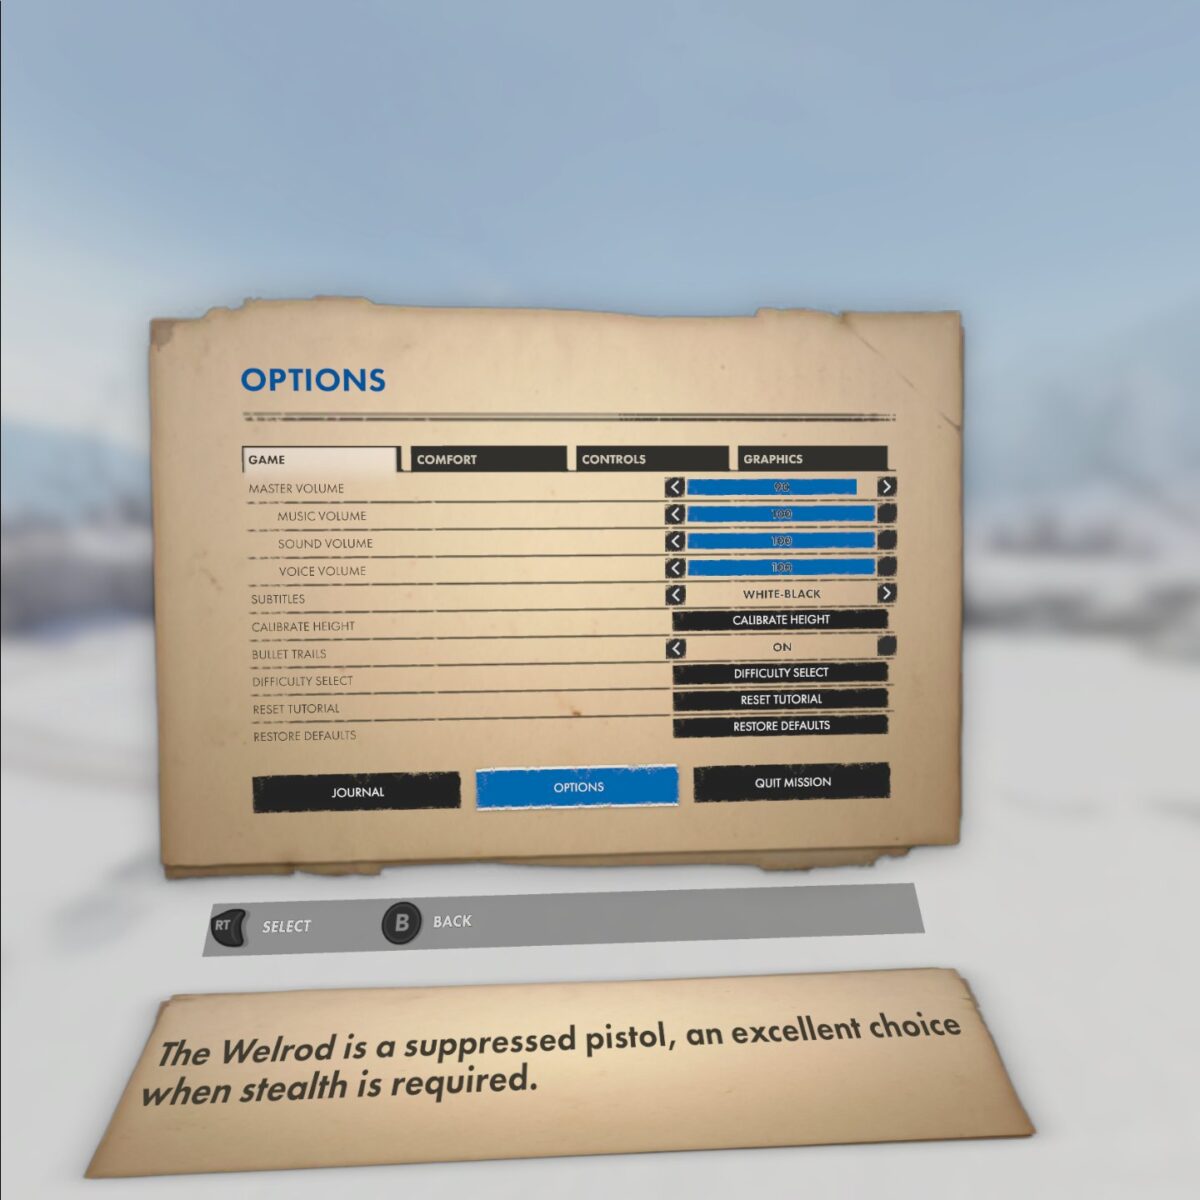 The Winter Warrior Options Menu. In the Game tab, listing options including volume sliders, subtitles, and difficulty.